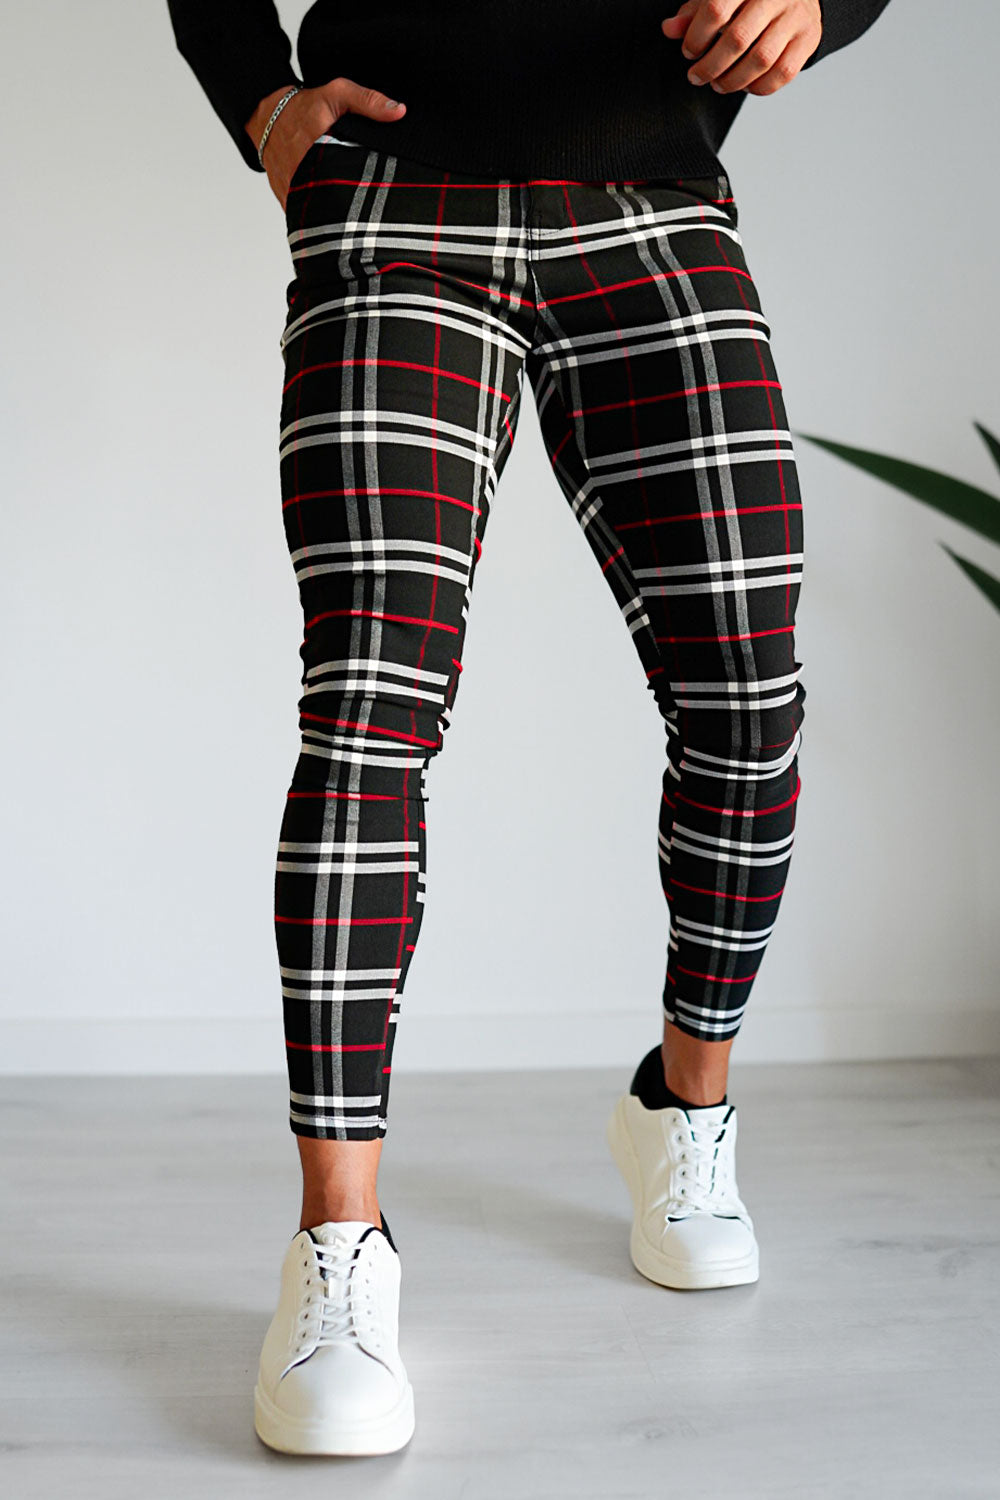  Men's Plaid Chino Pants - Black And Red